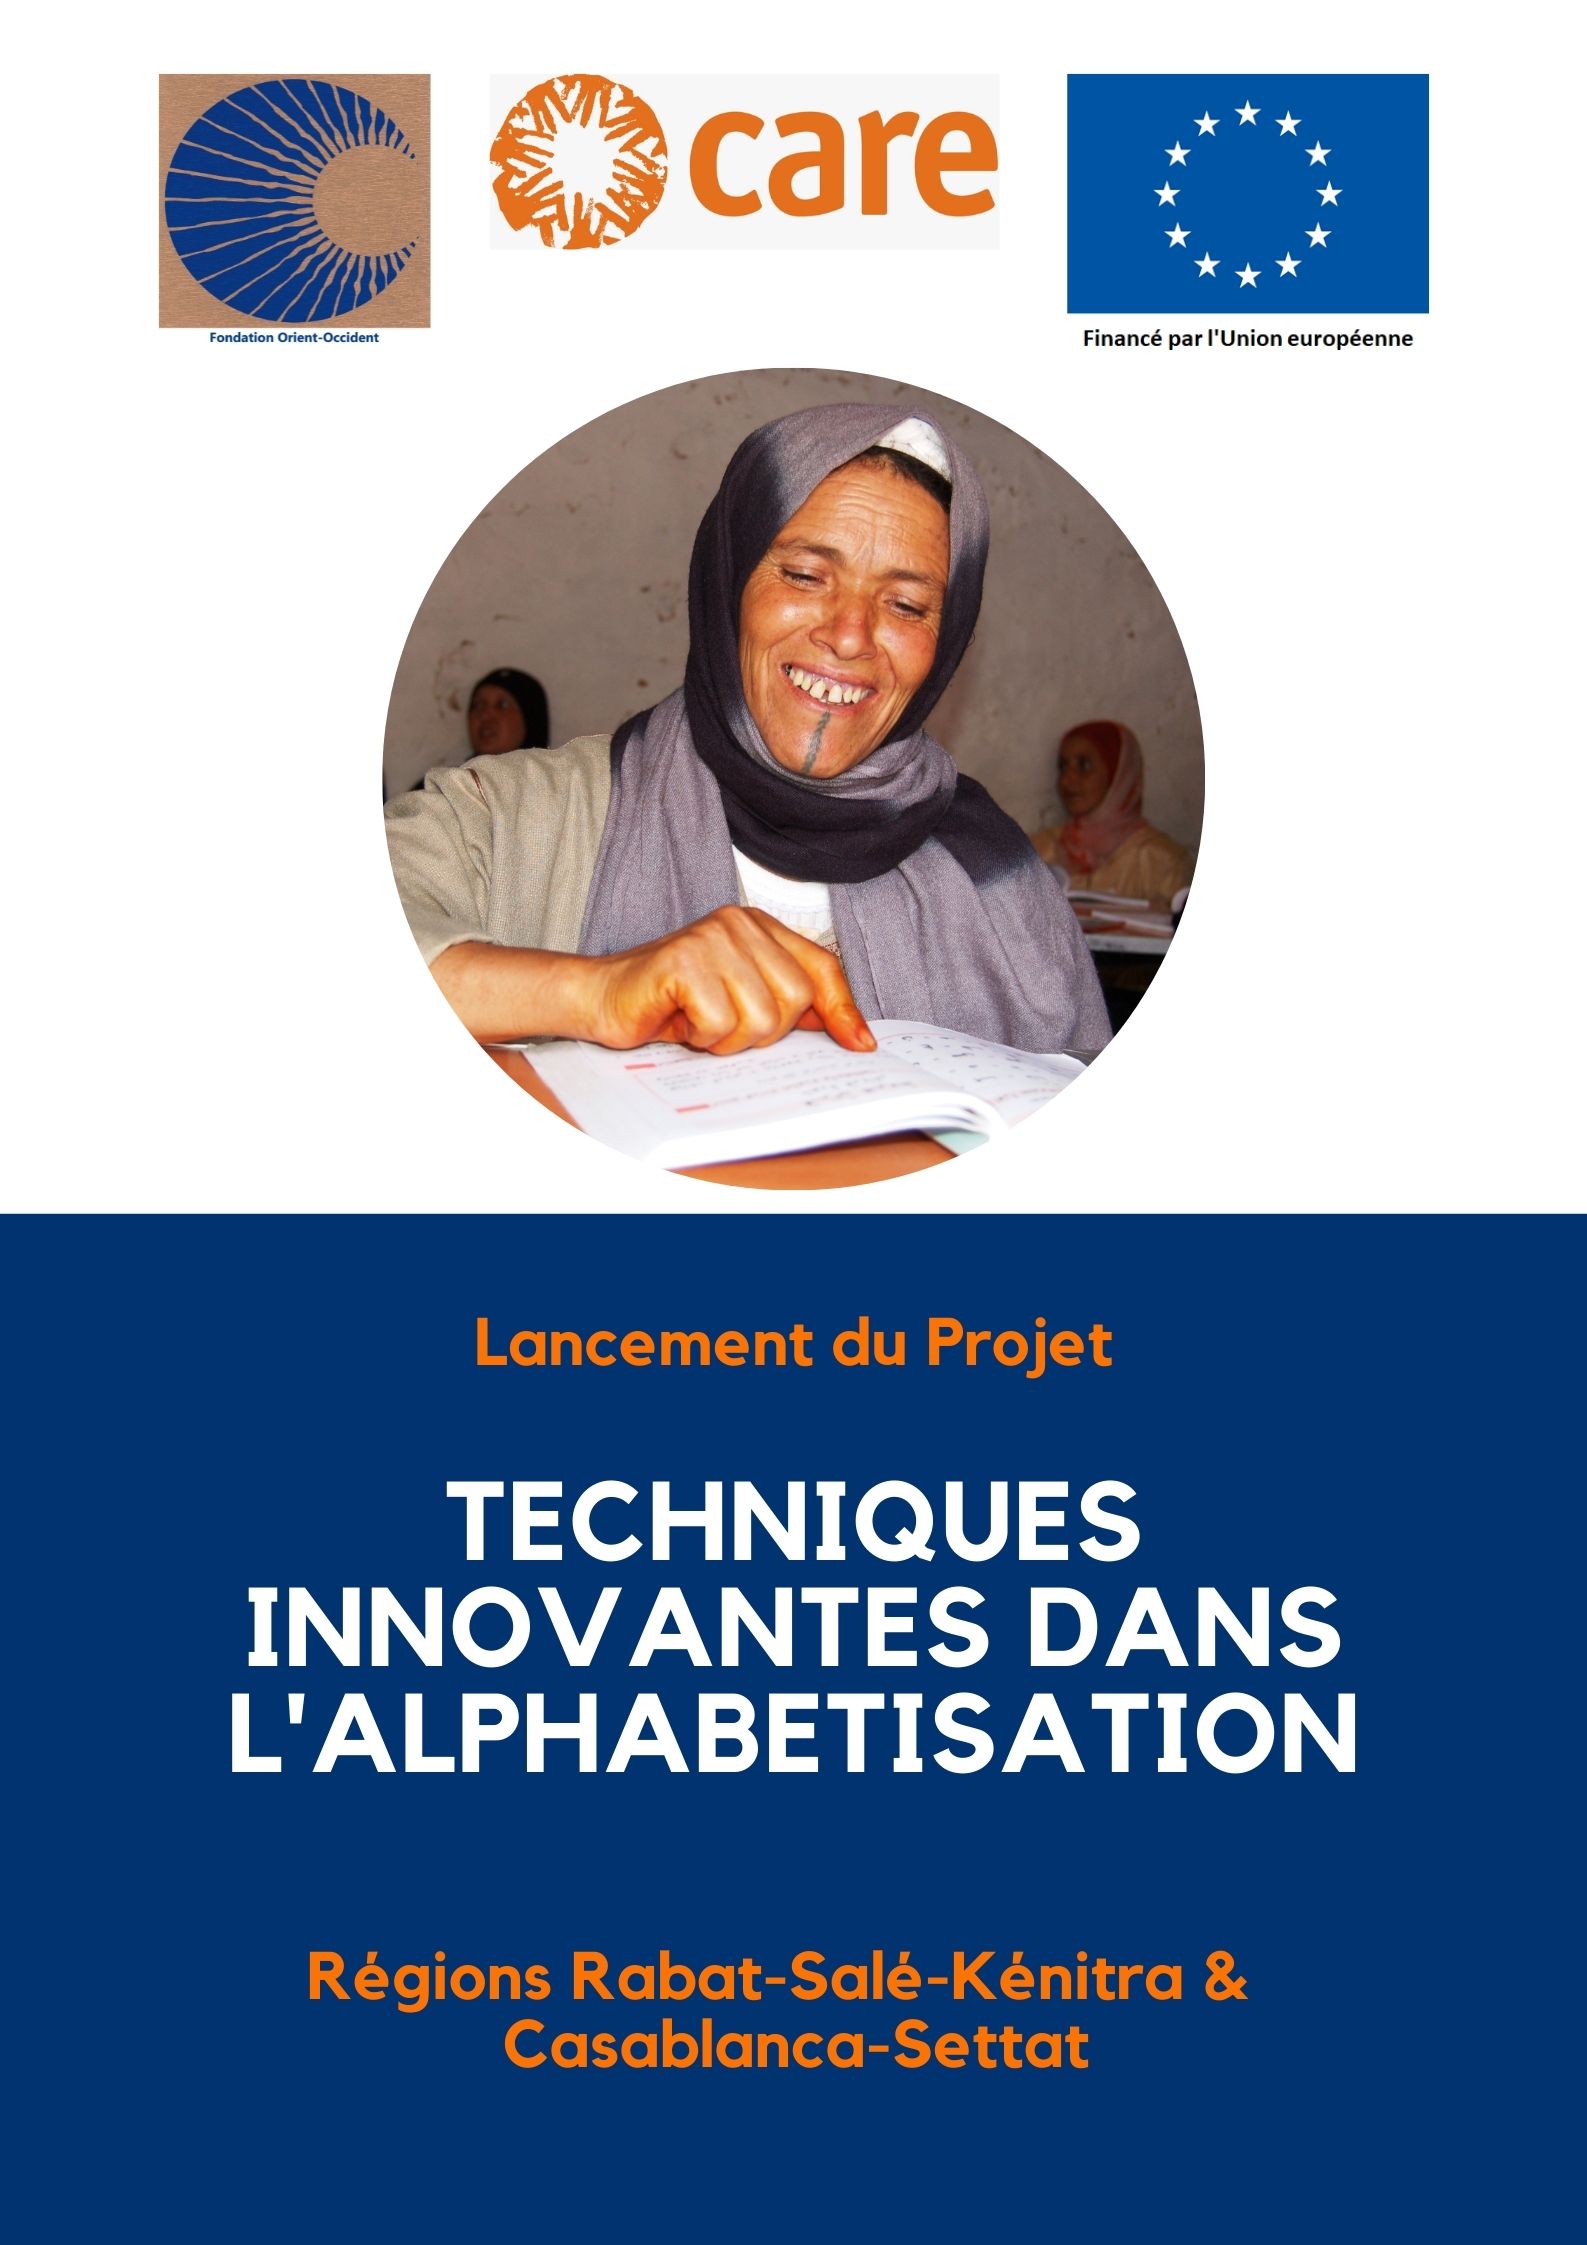 New project “Innovative techniques in literacy” in partnership with the European Union and CARE International Maroc